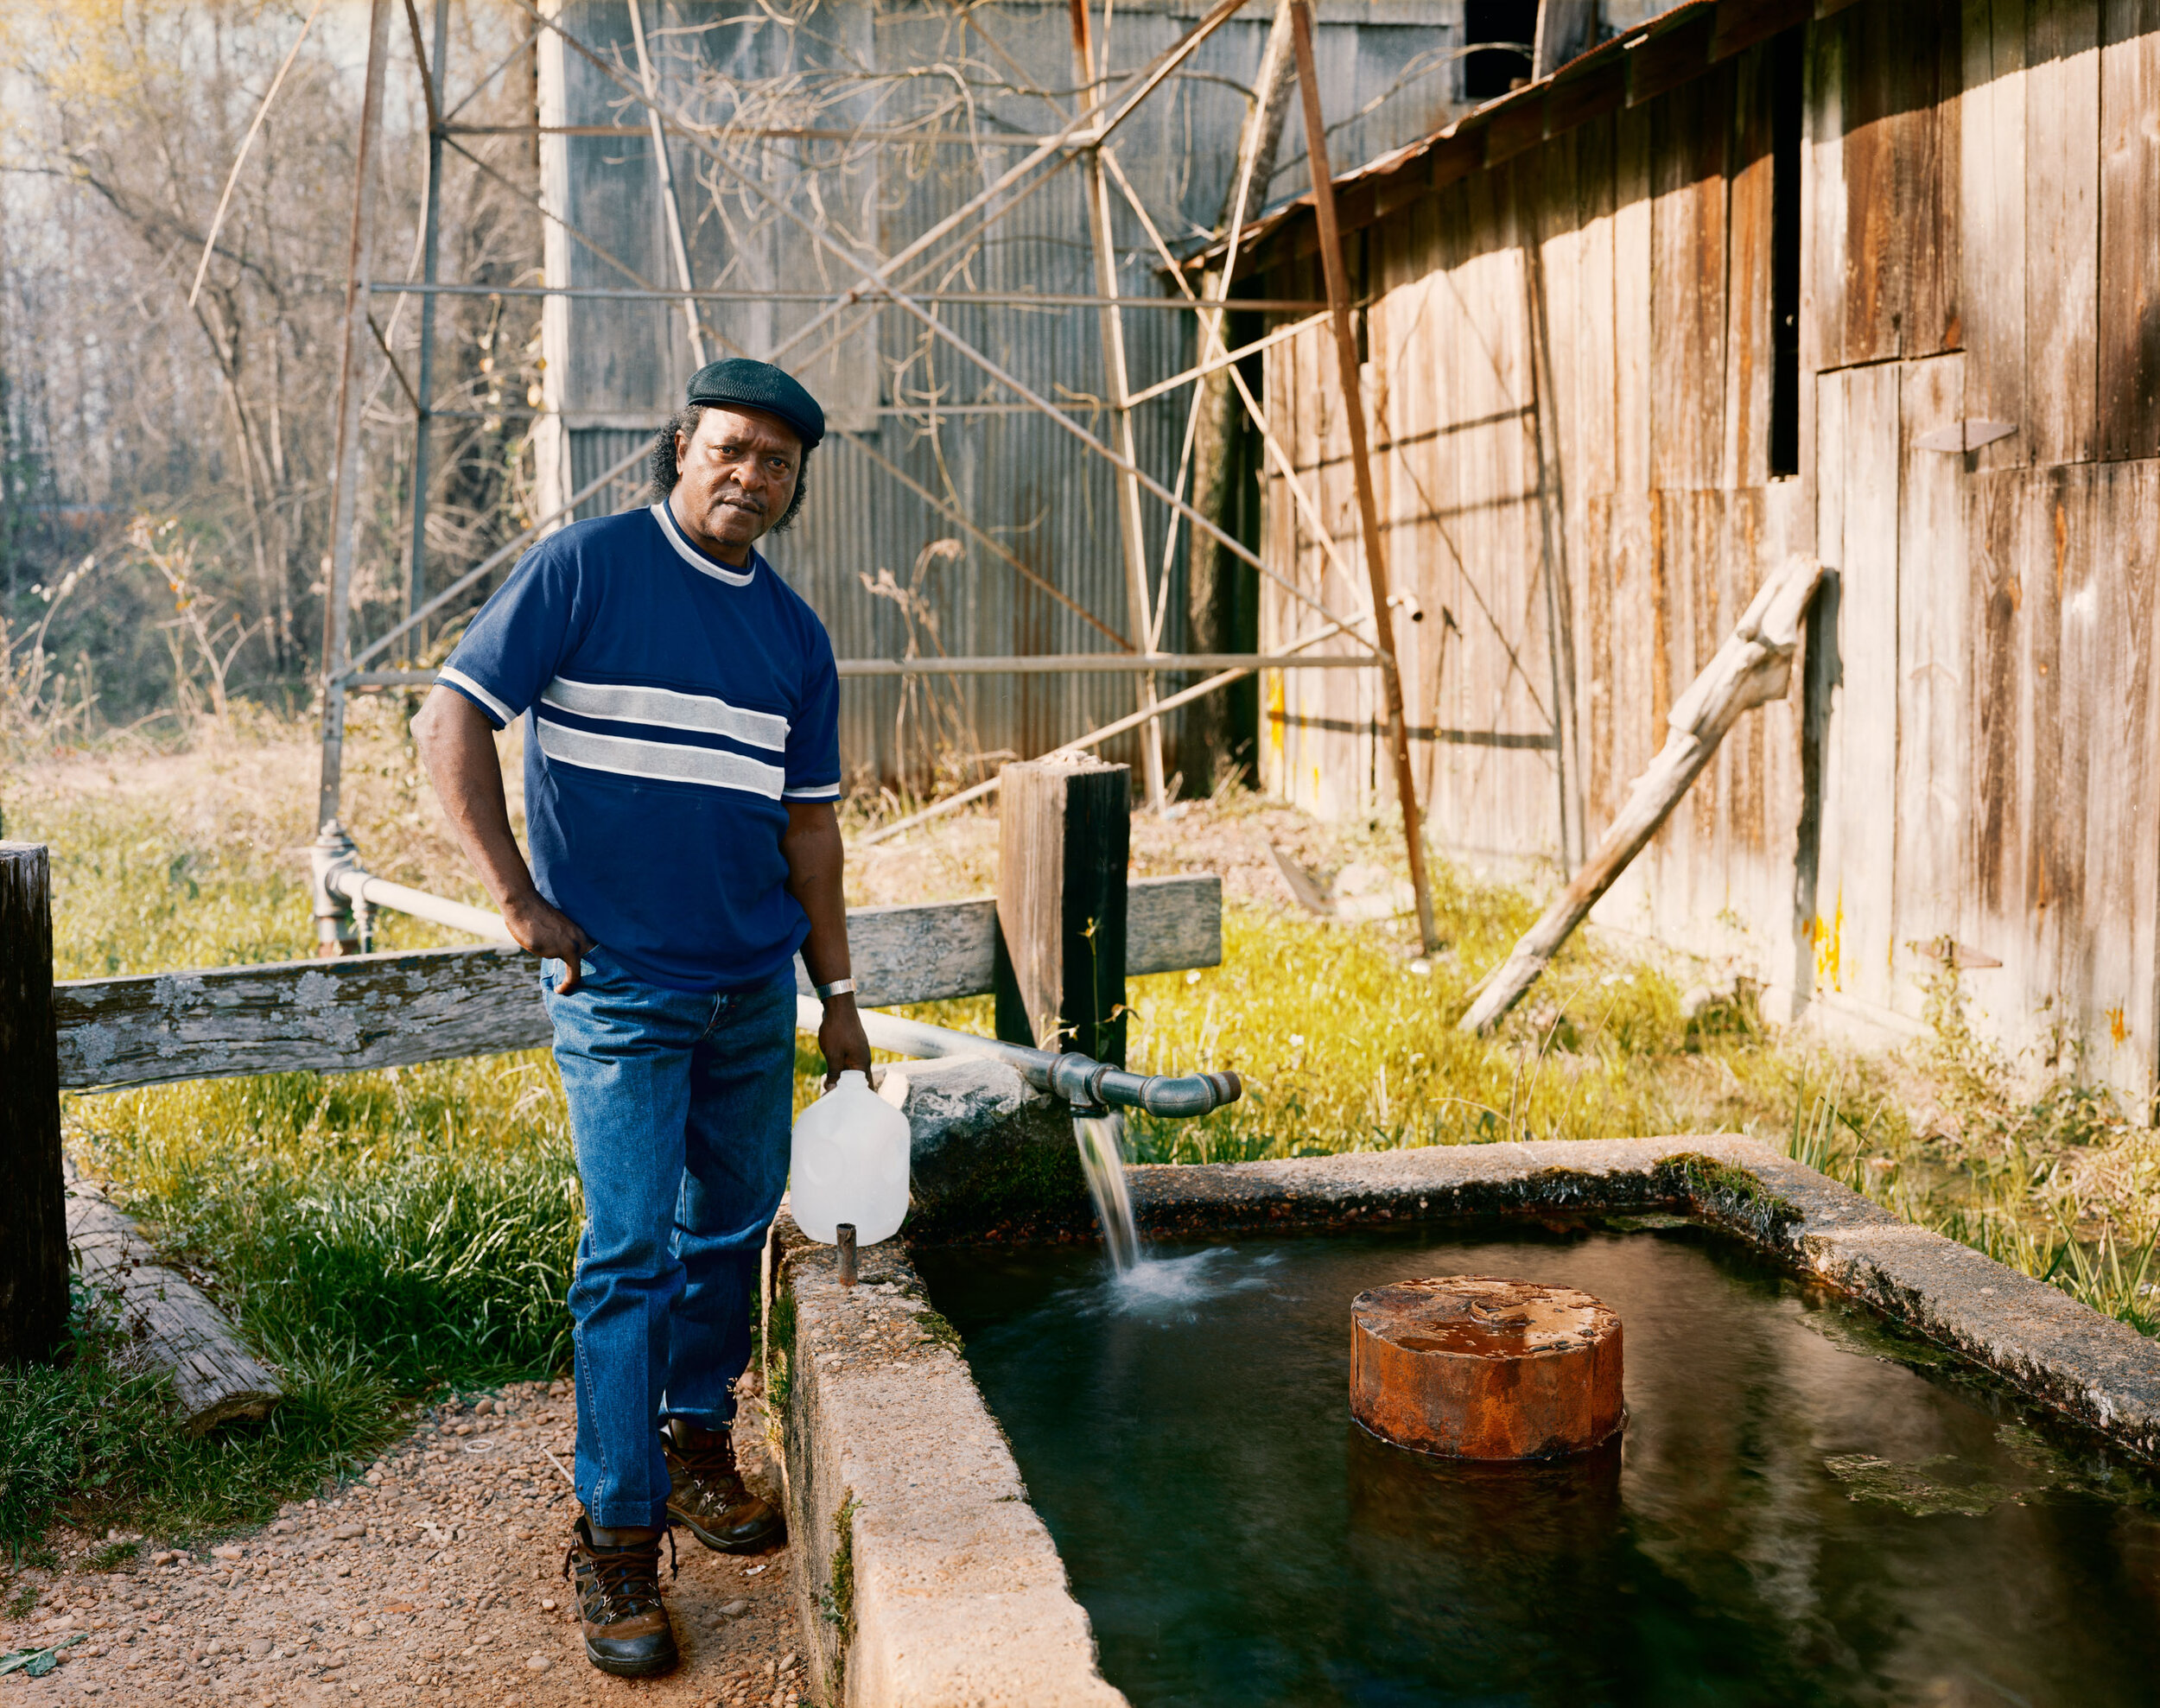 A Man Filling Bottles at a Spring behind the Cotton Gin in Sprott, Alabama, April 1999